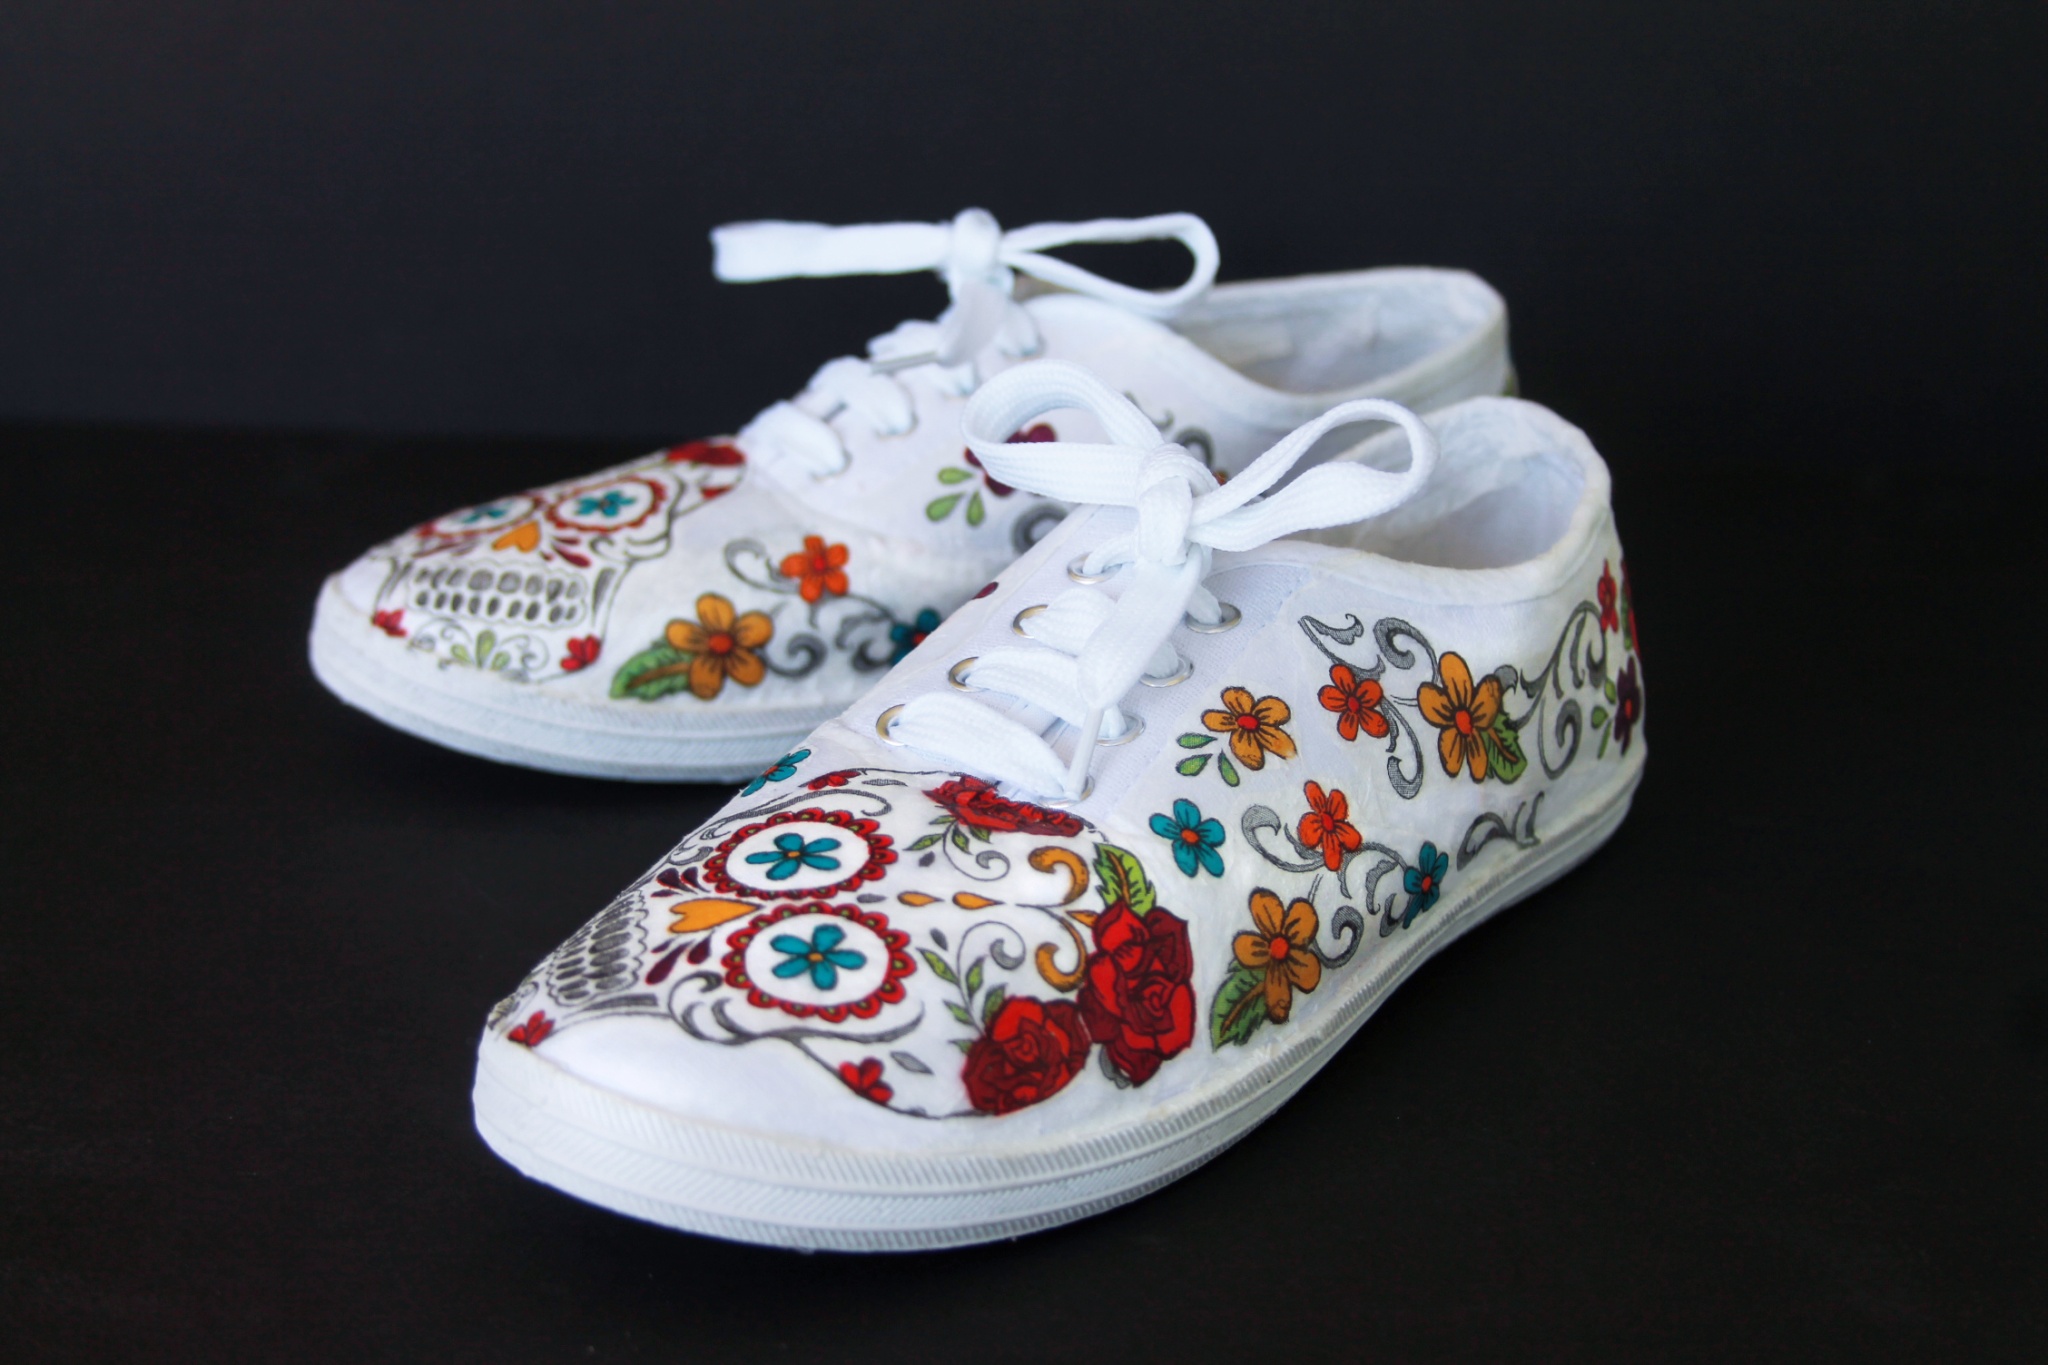 DIY Day of the Dead shoes